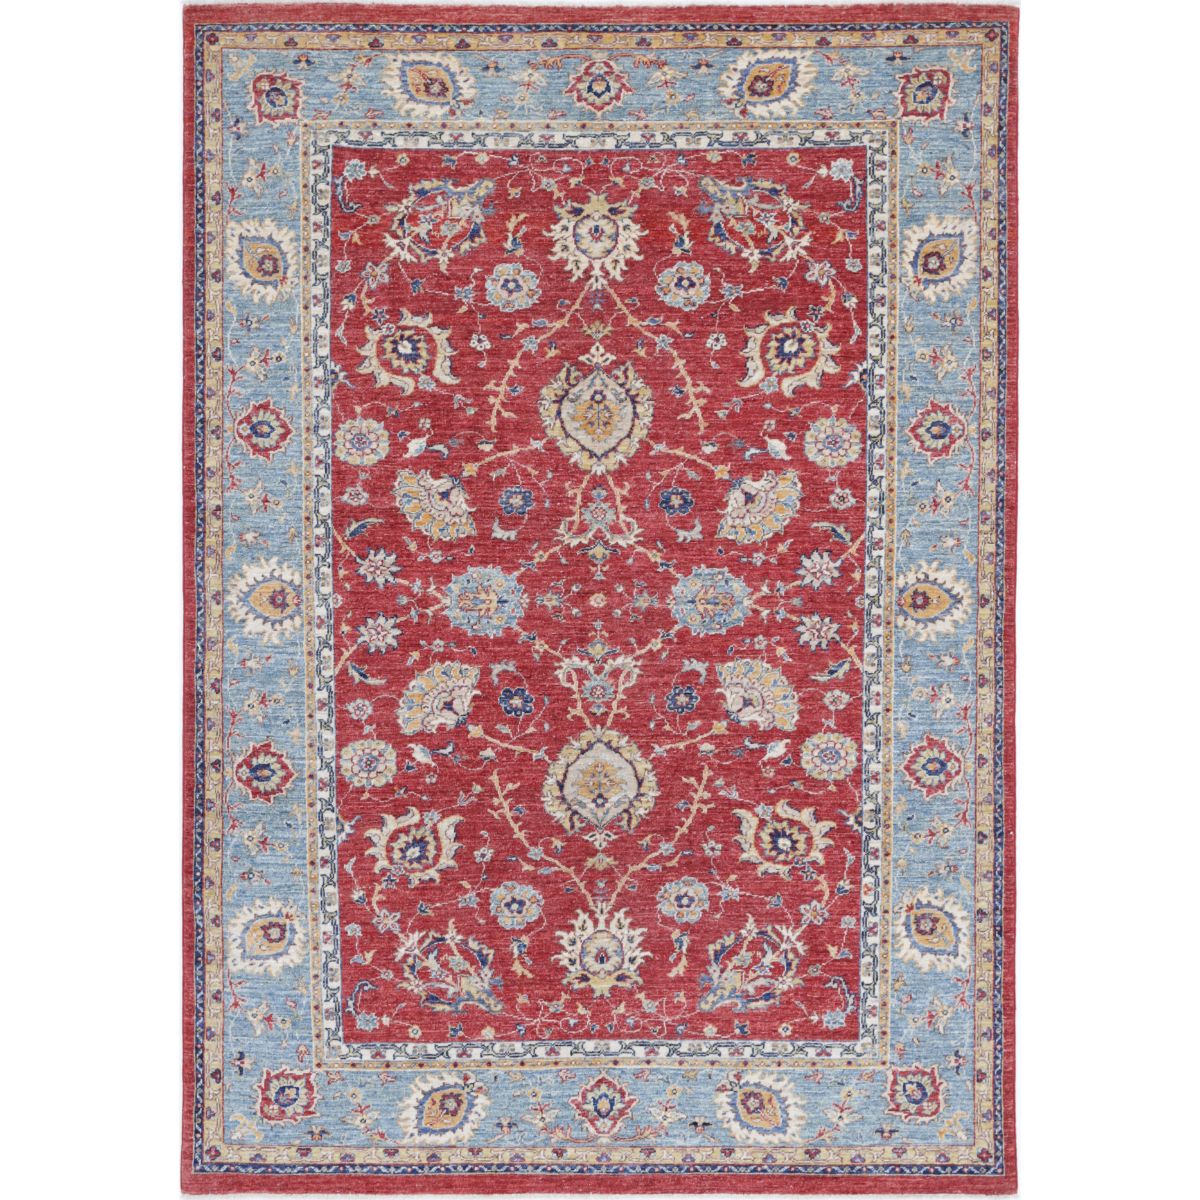 Ziegler Collection Hand Knotted Red 5'8" X 7'11" Rectangle Farhan Design Wool Rug